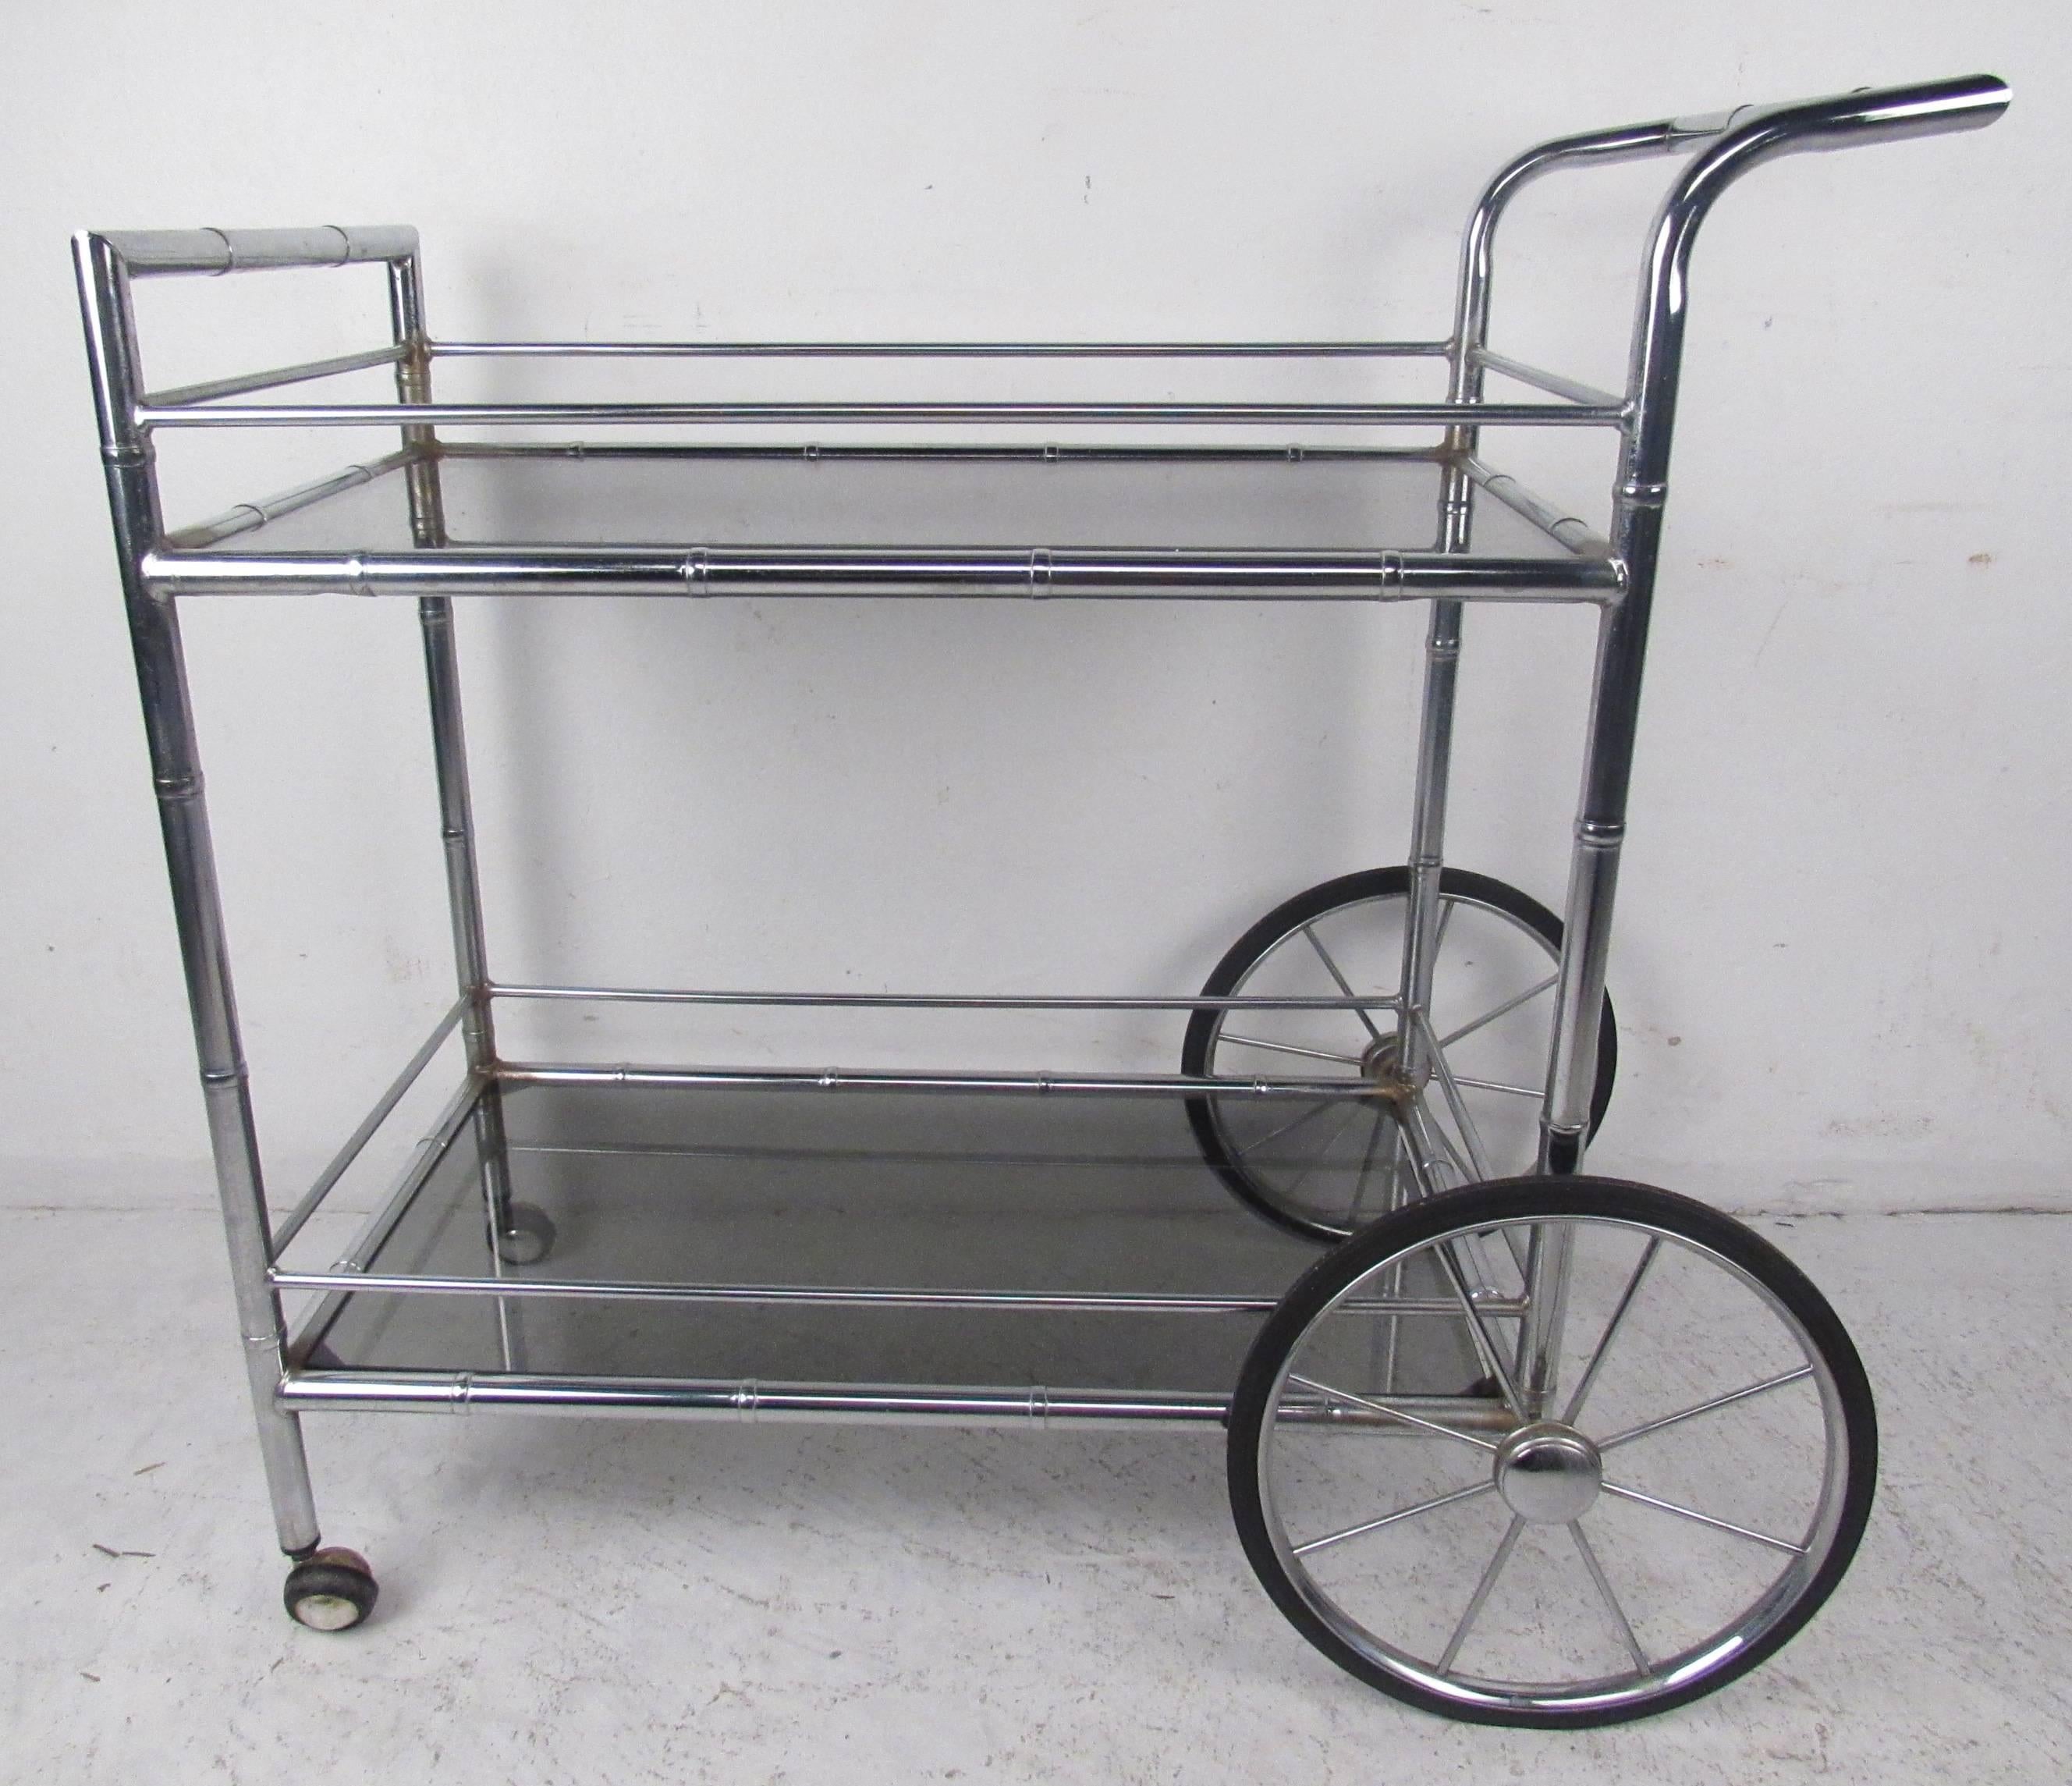 Chrome serving cart with bamboo motif and smoked glass shelves. 
Please confirm item location (NY or NJ) with dealer.